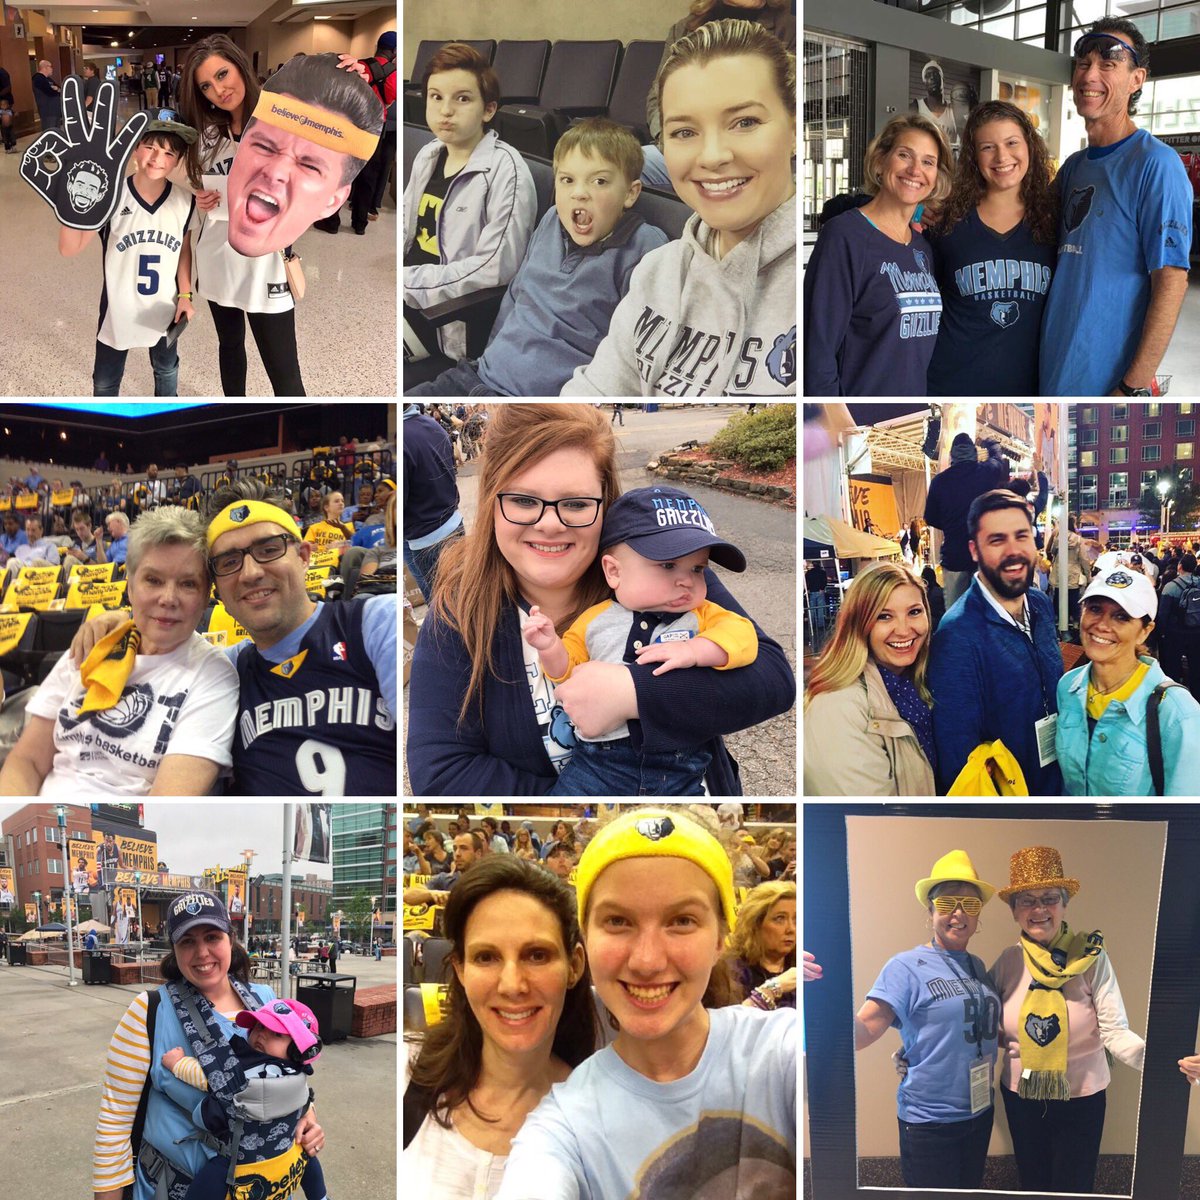 Happy Mother's Day to all the moms out there! Use #GrizzMama & show us yours 💙💙 https://t.co/YOLTagb7yW